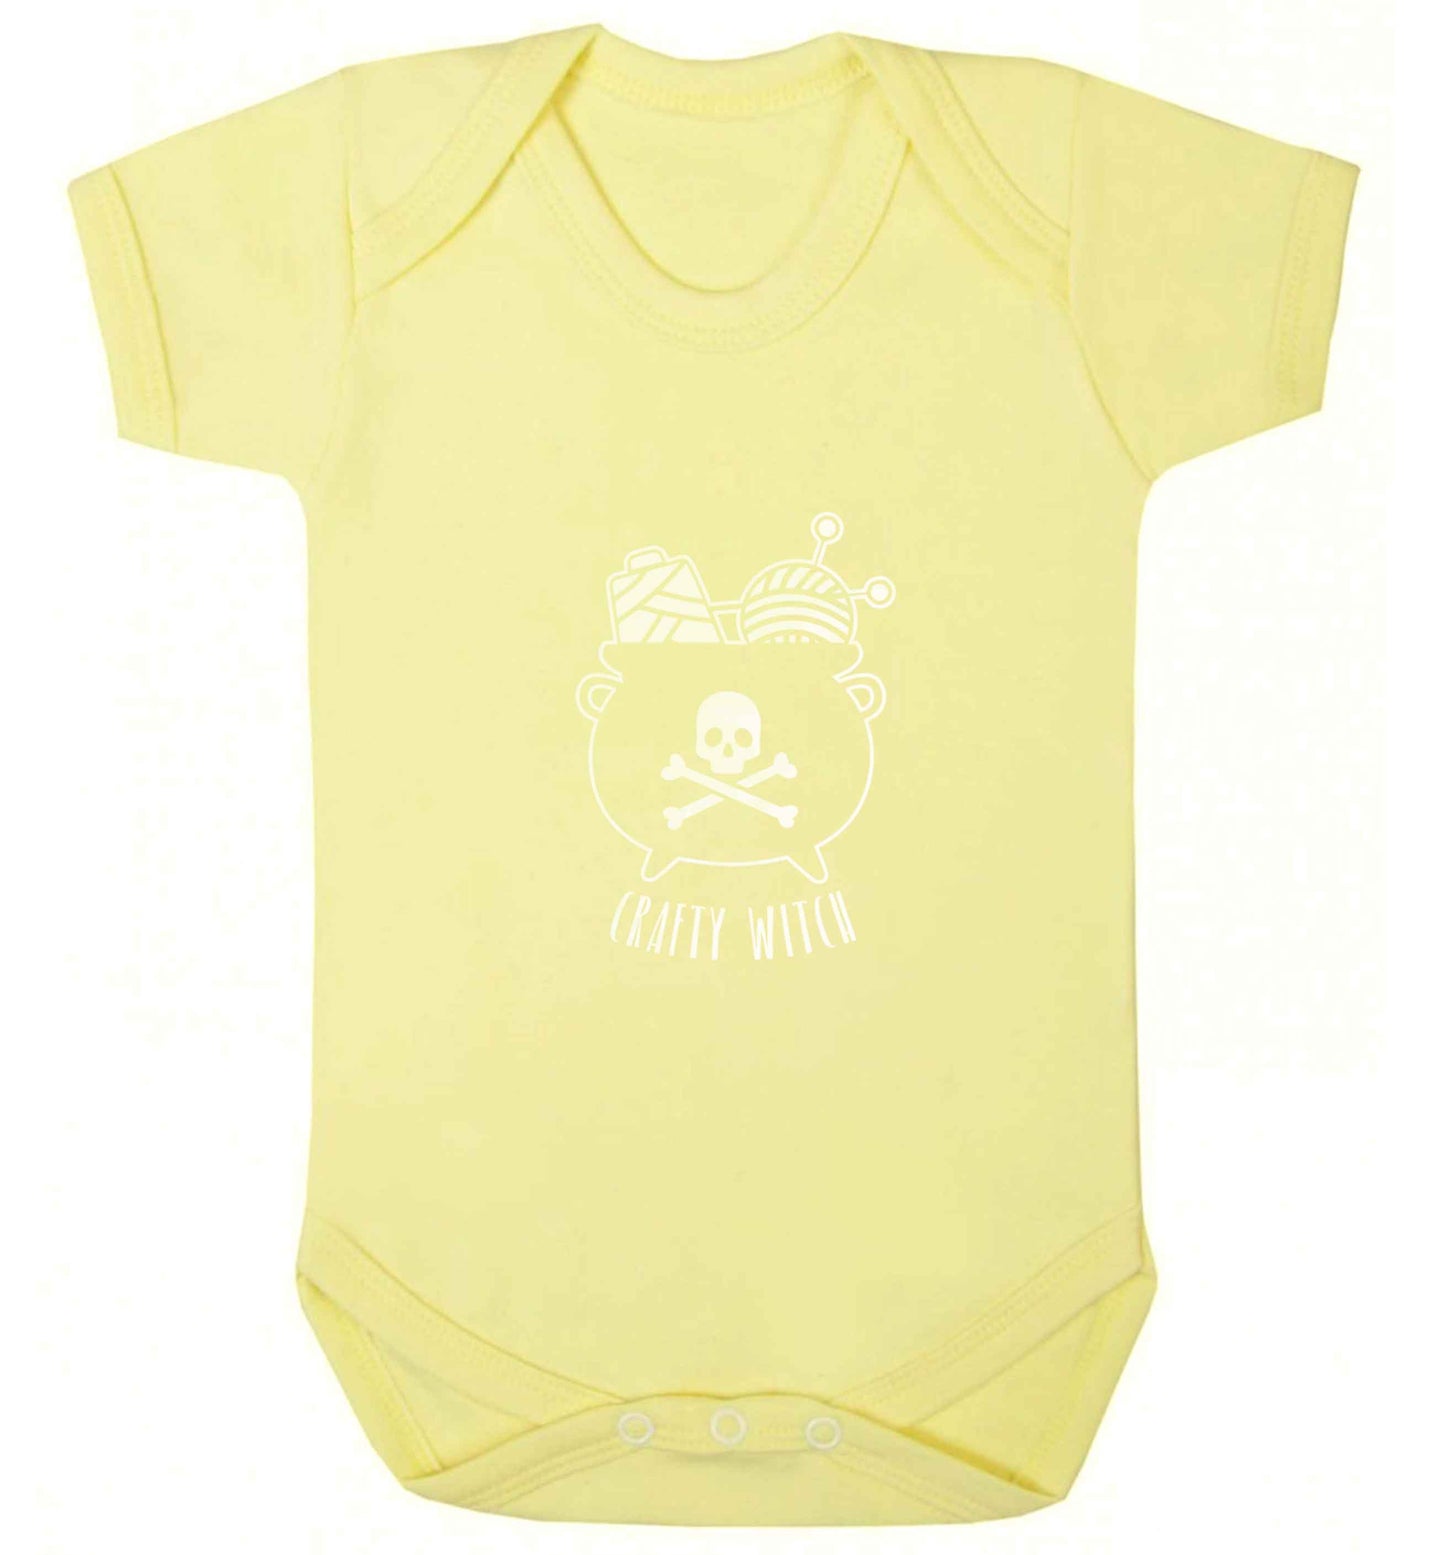 Crafty witch baby vest pale yellow 18-24 months